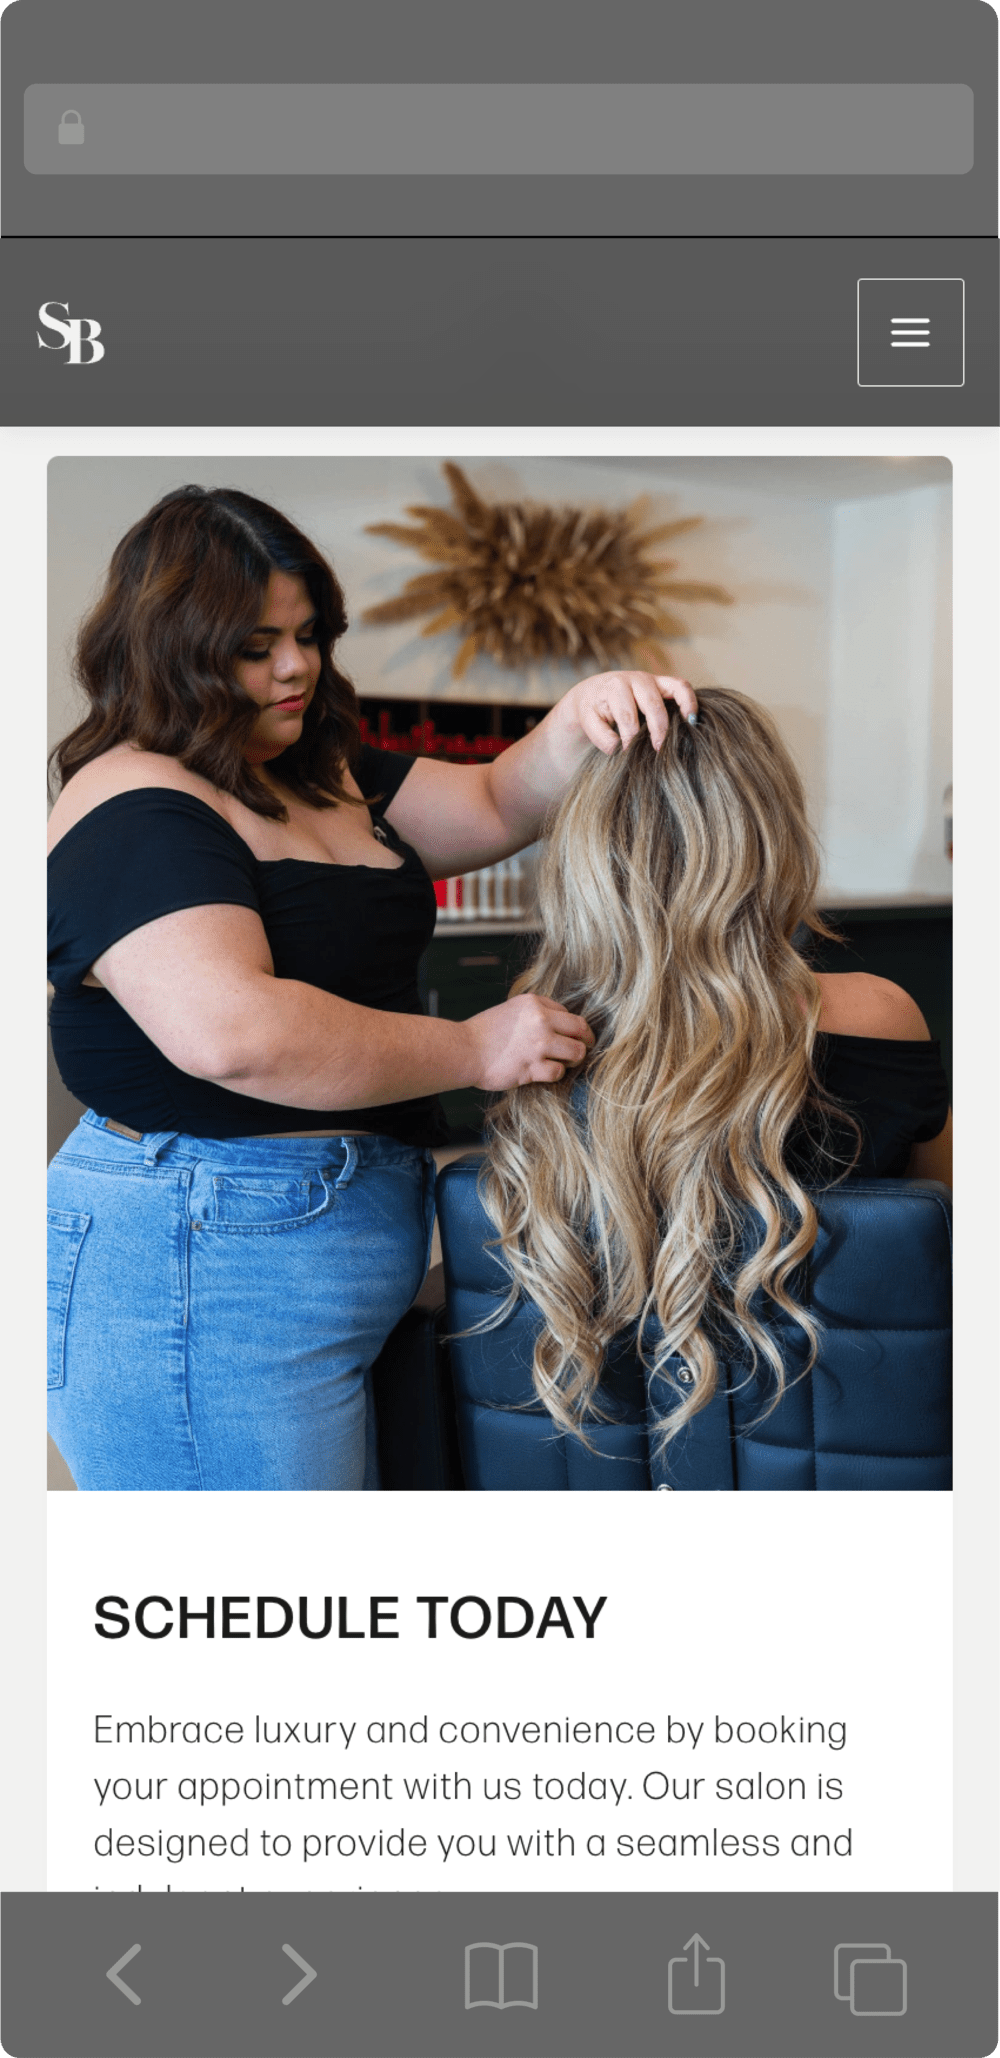 An image of Gaby working with a client's hair